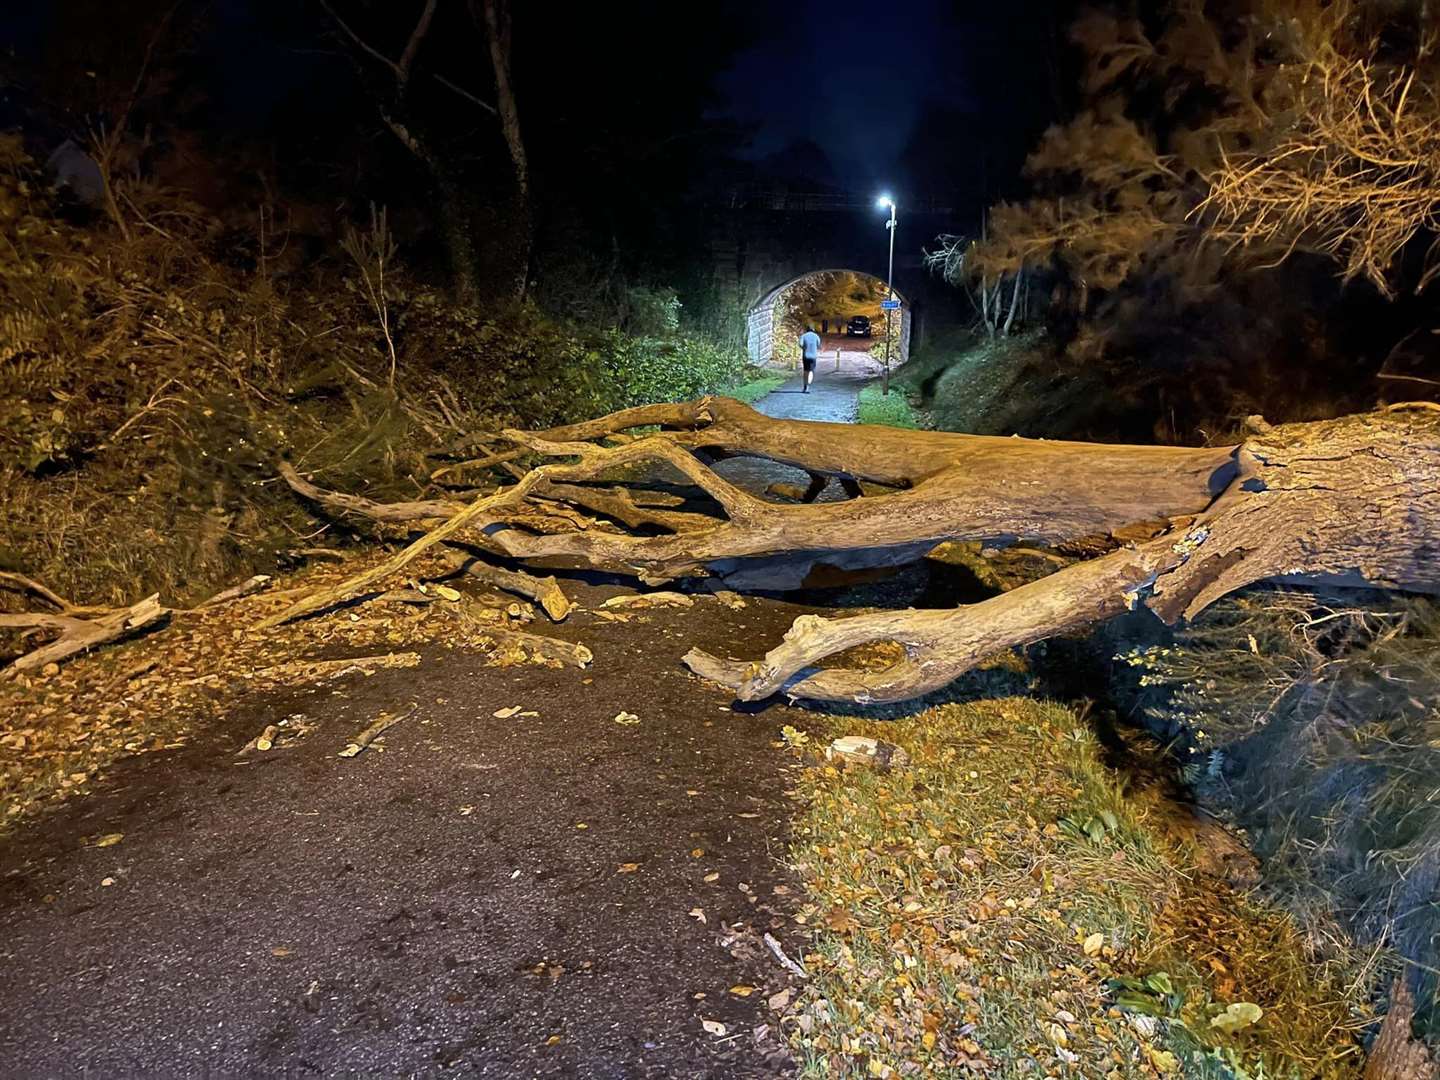 Overnight storms have brought down a number of tress in and around Inverness